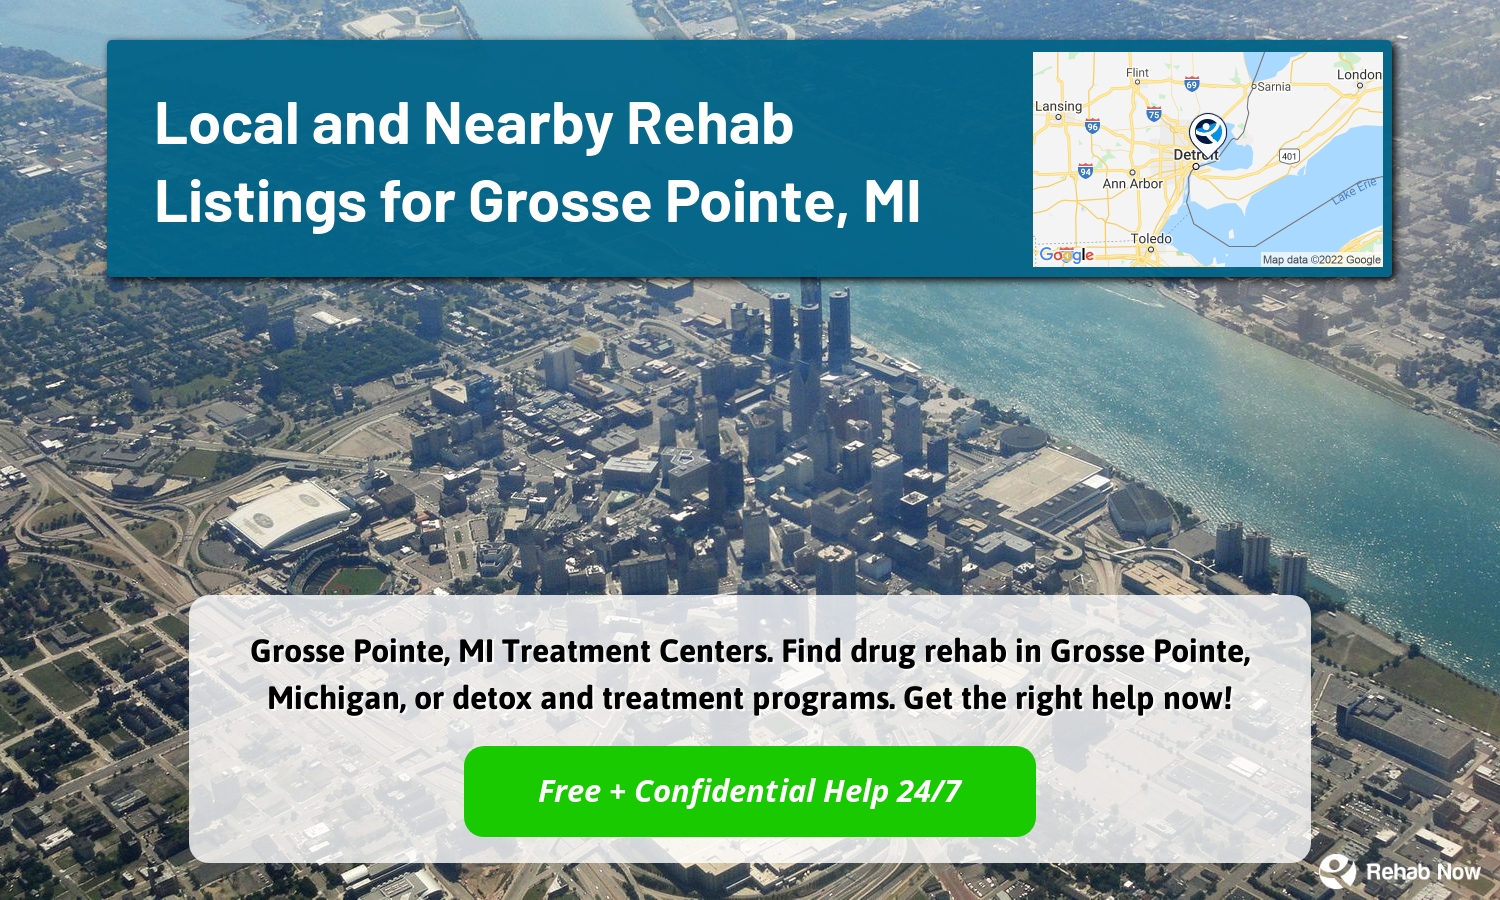 Grosse Pointe, MI Treatment Centers. Find drug rehab in Grosse Pointe, Michigan, or detox and treatment programs. Get the right help now!